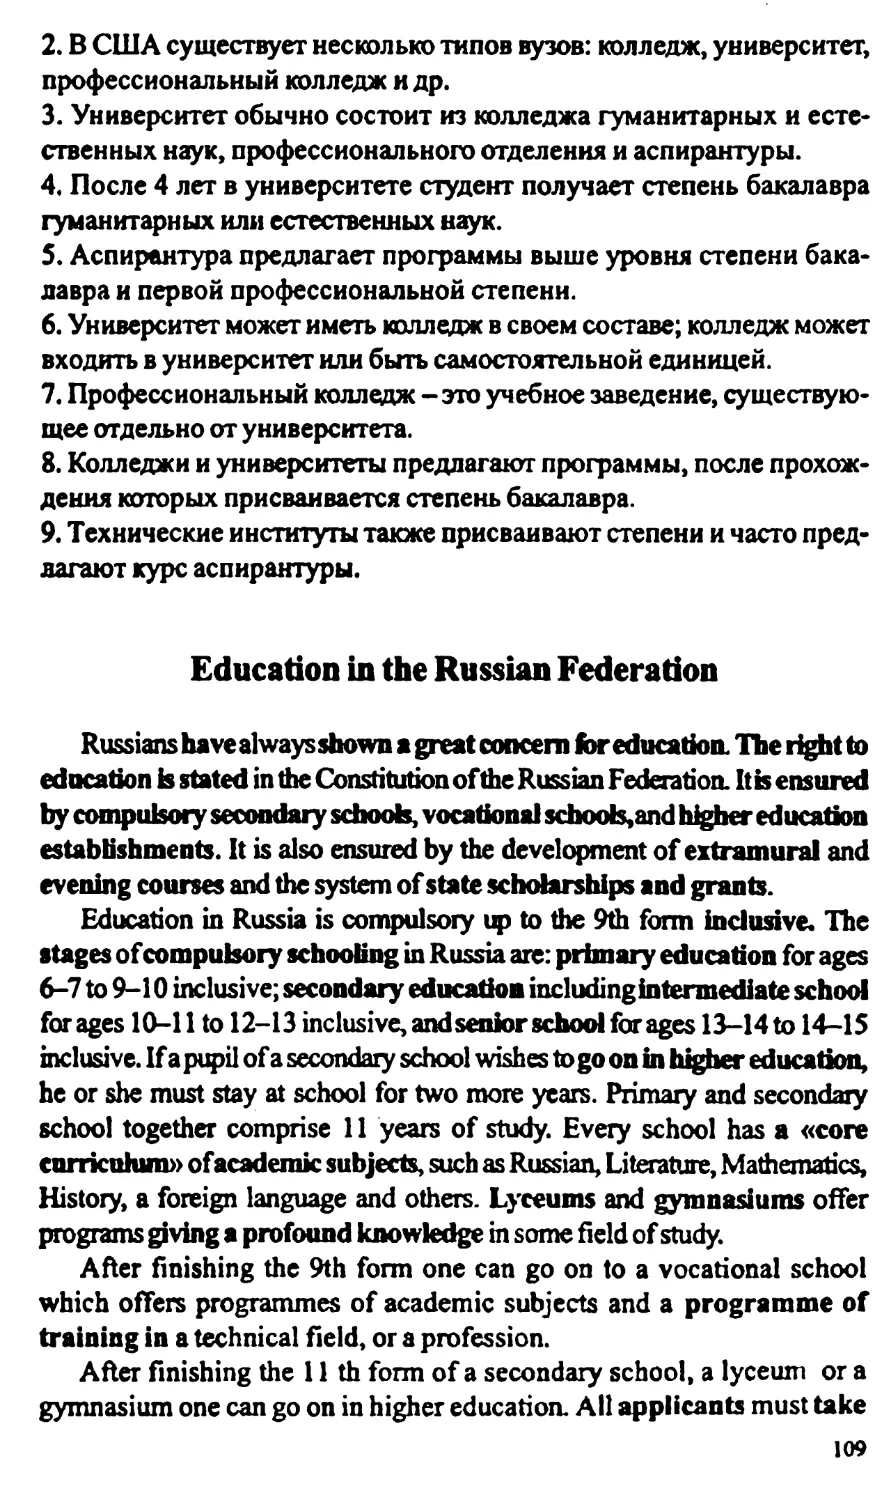 Education in the Russian Federation